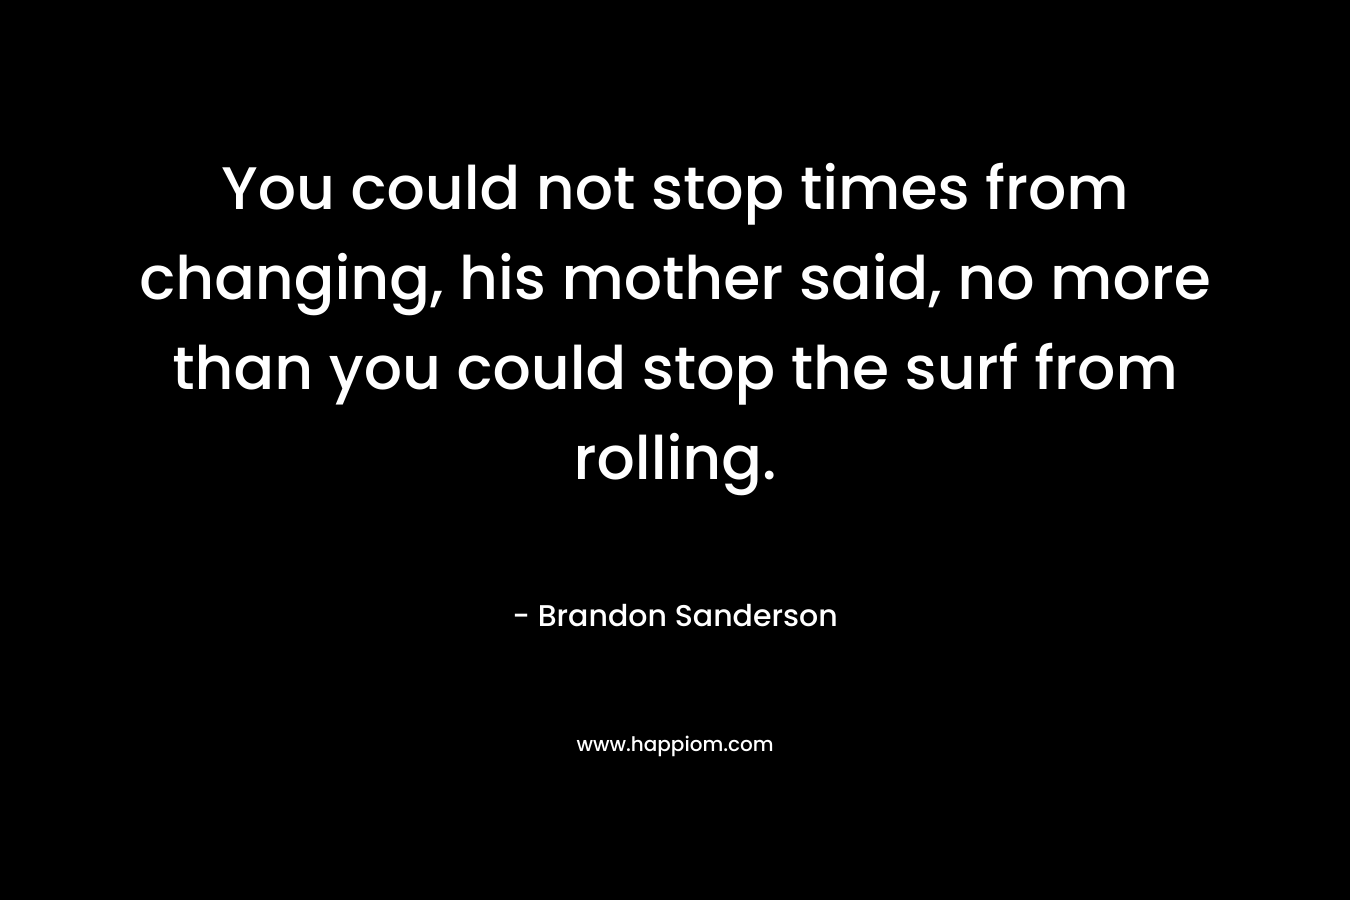 You could not stop times from changing, his mother said, no more than you could stop the surf from rolling. – Brandon Sanderson